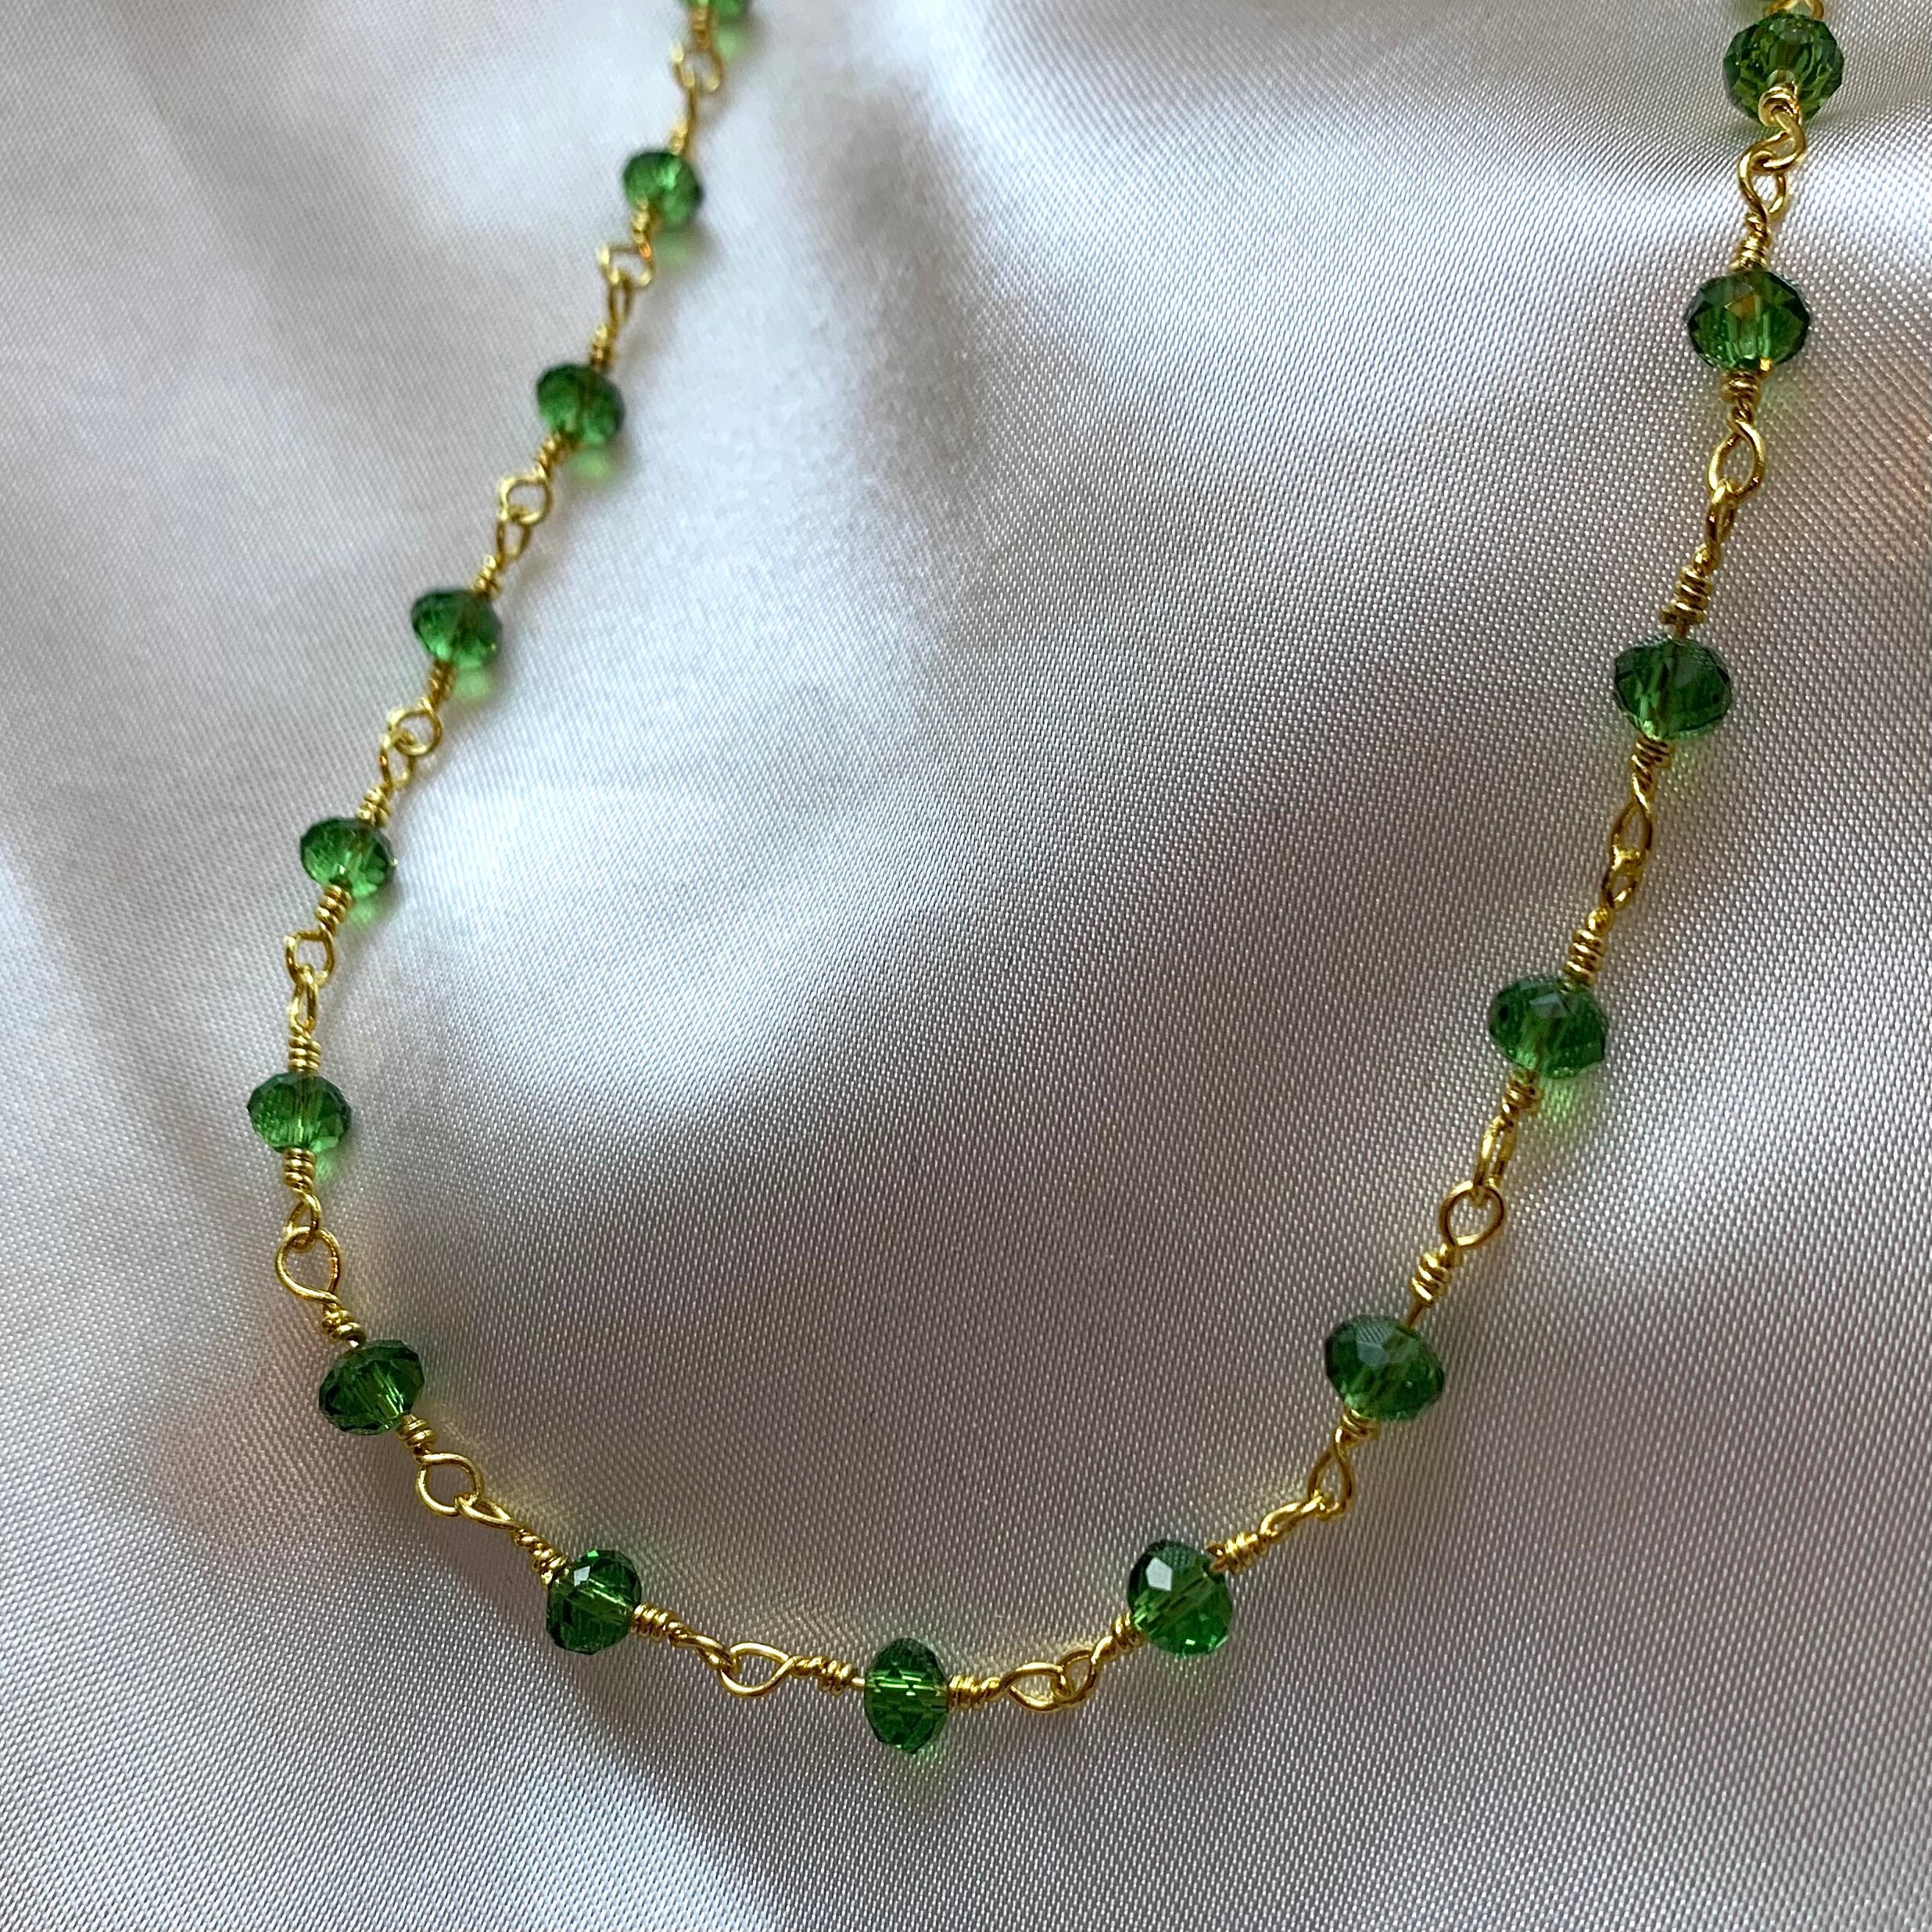 Gorgeous Colourful Red Green or Blue Crystal Bead Gold Chain - Etsy